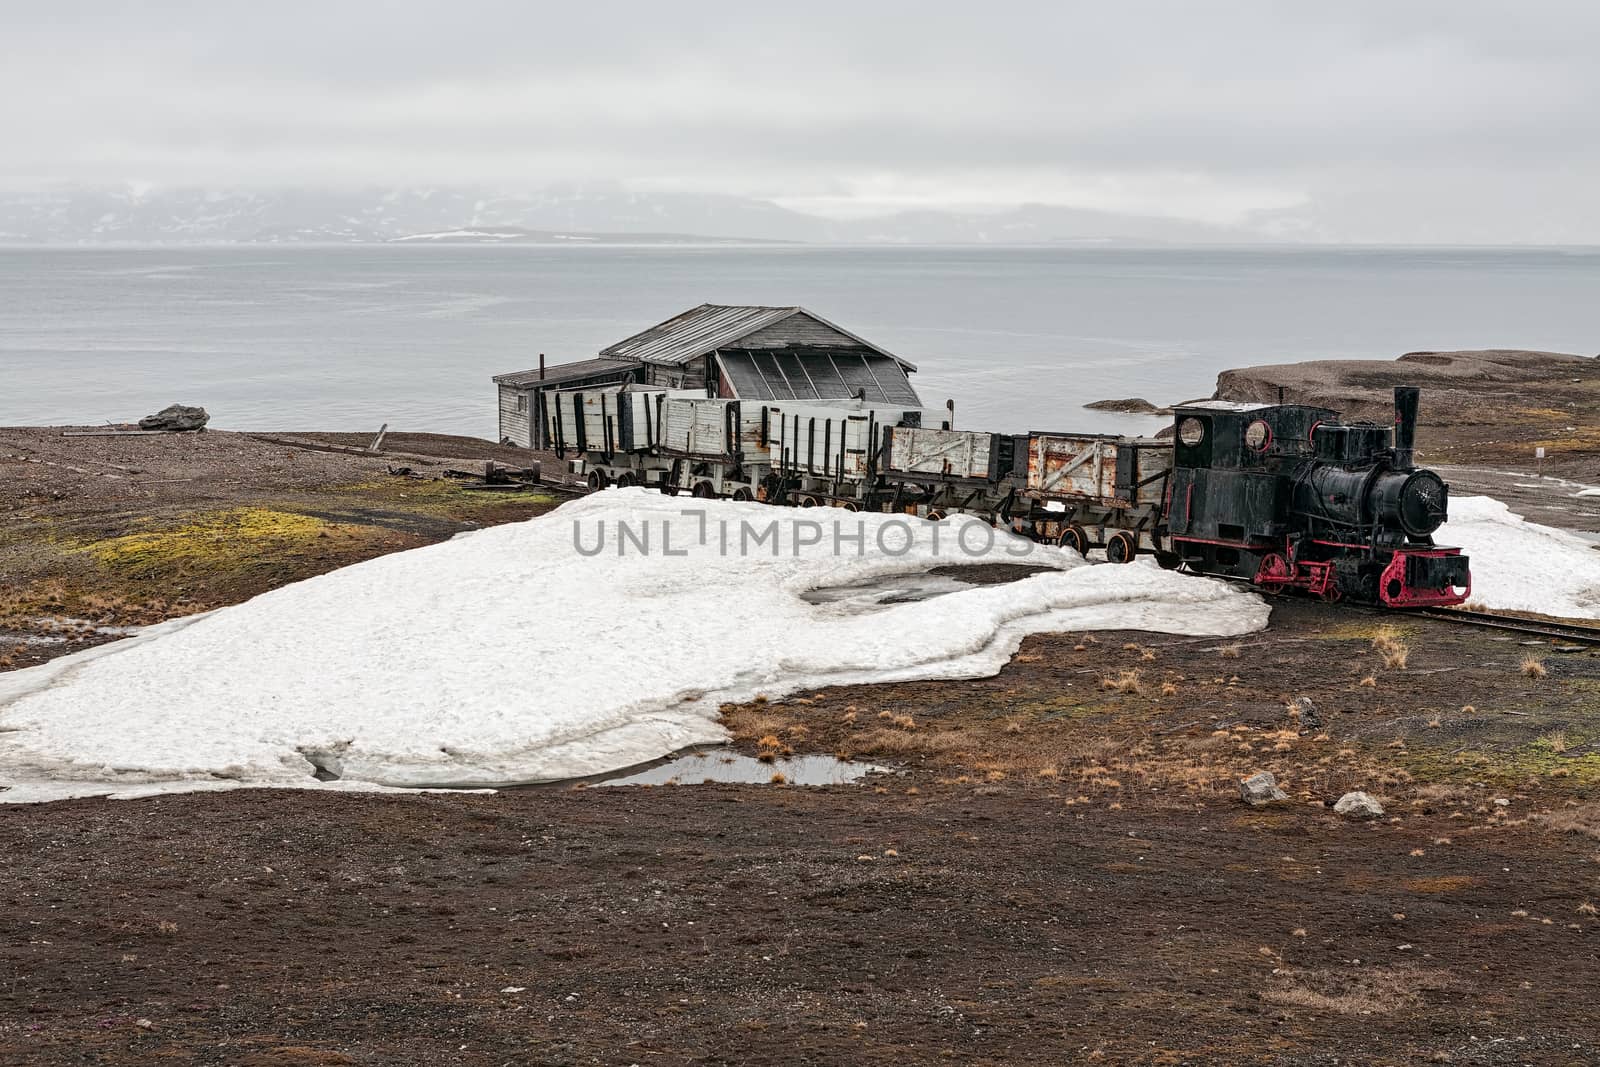 Old industrial train and hut in Ny Alesund, Svalbard islands by LuigiMorbidelli